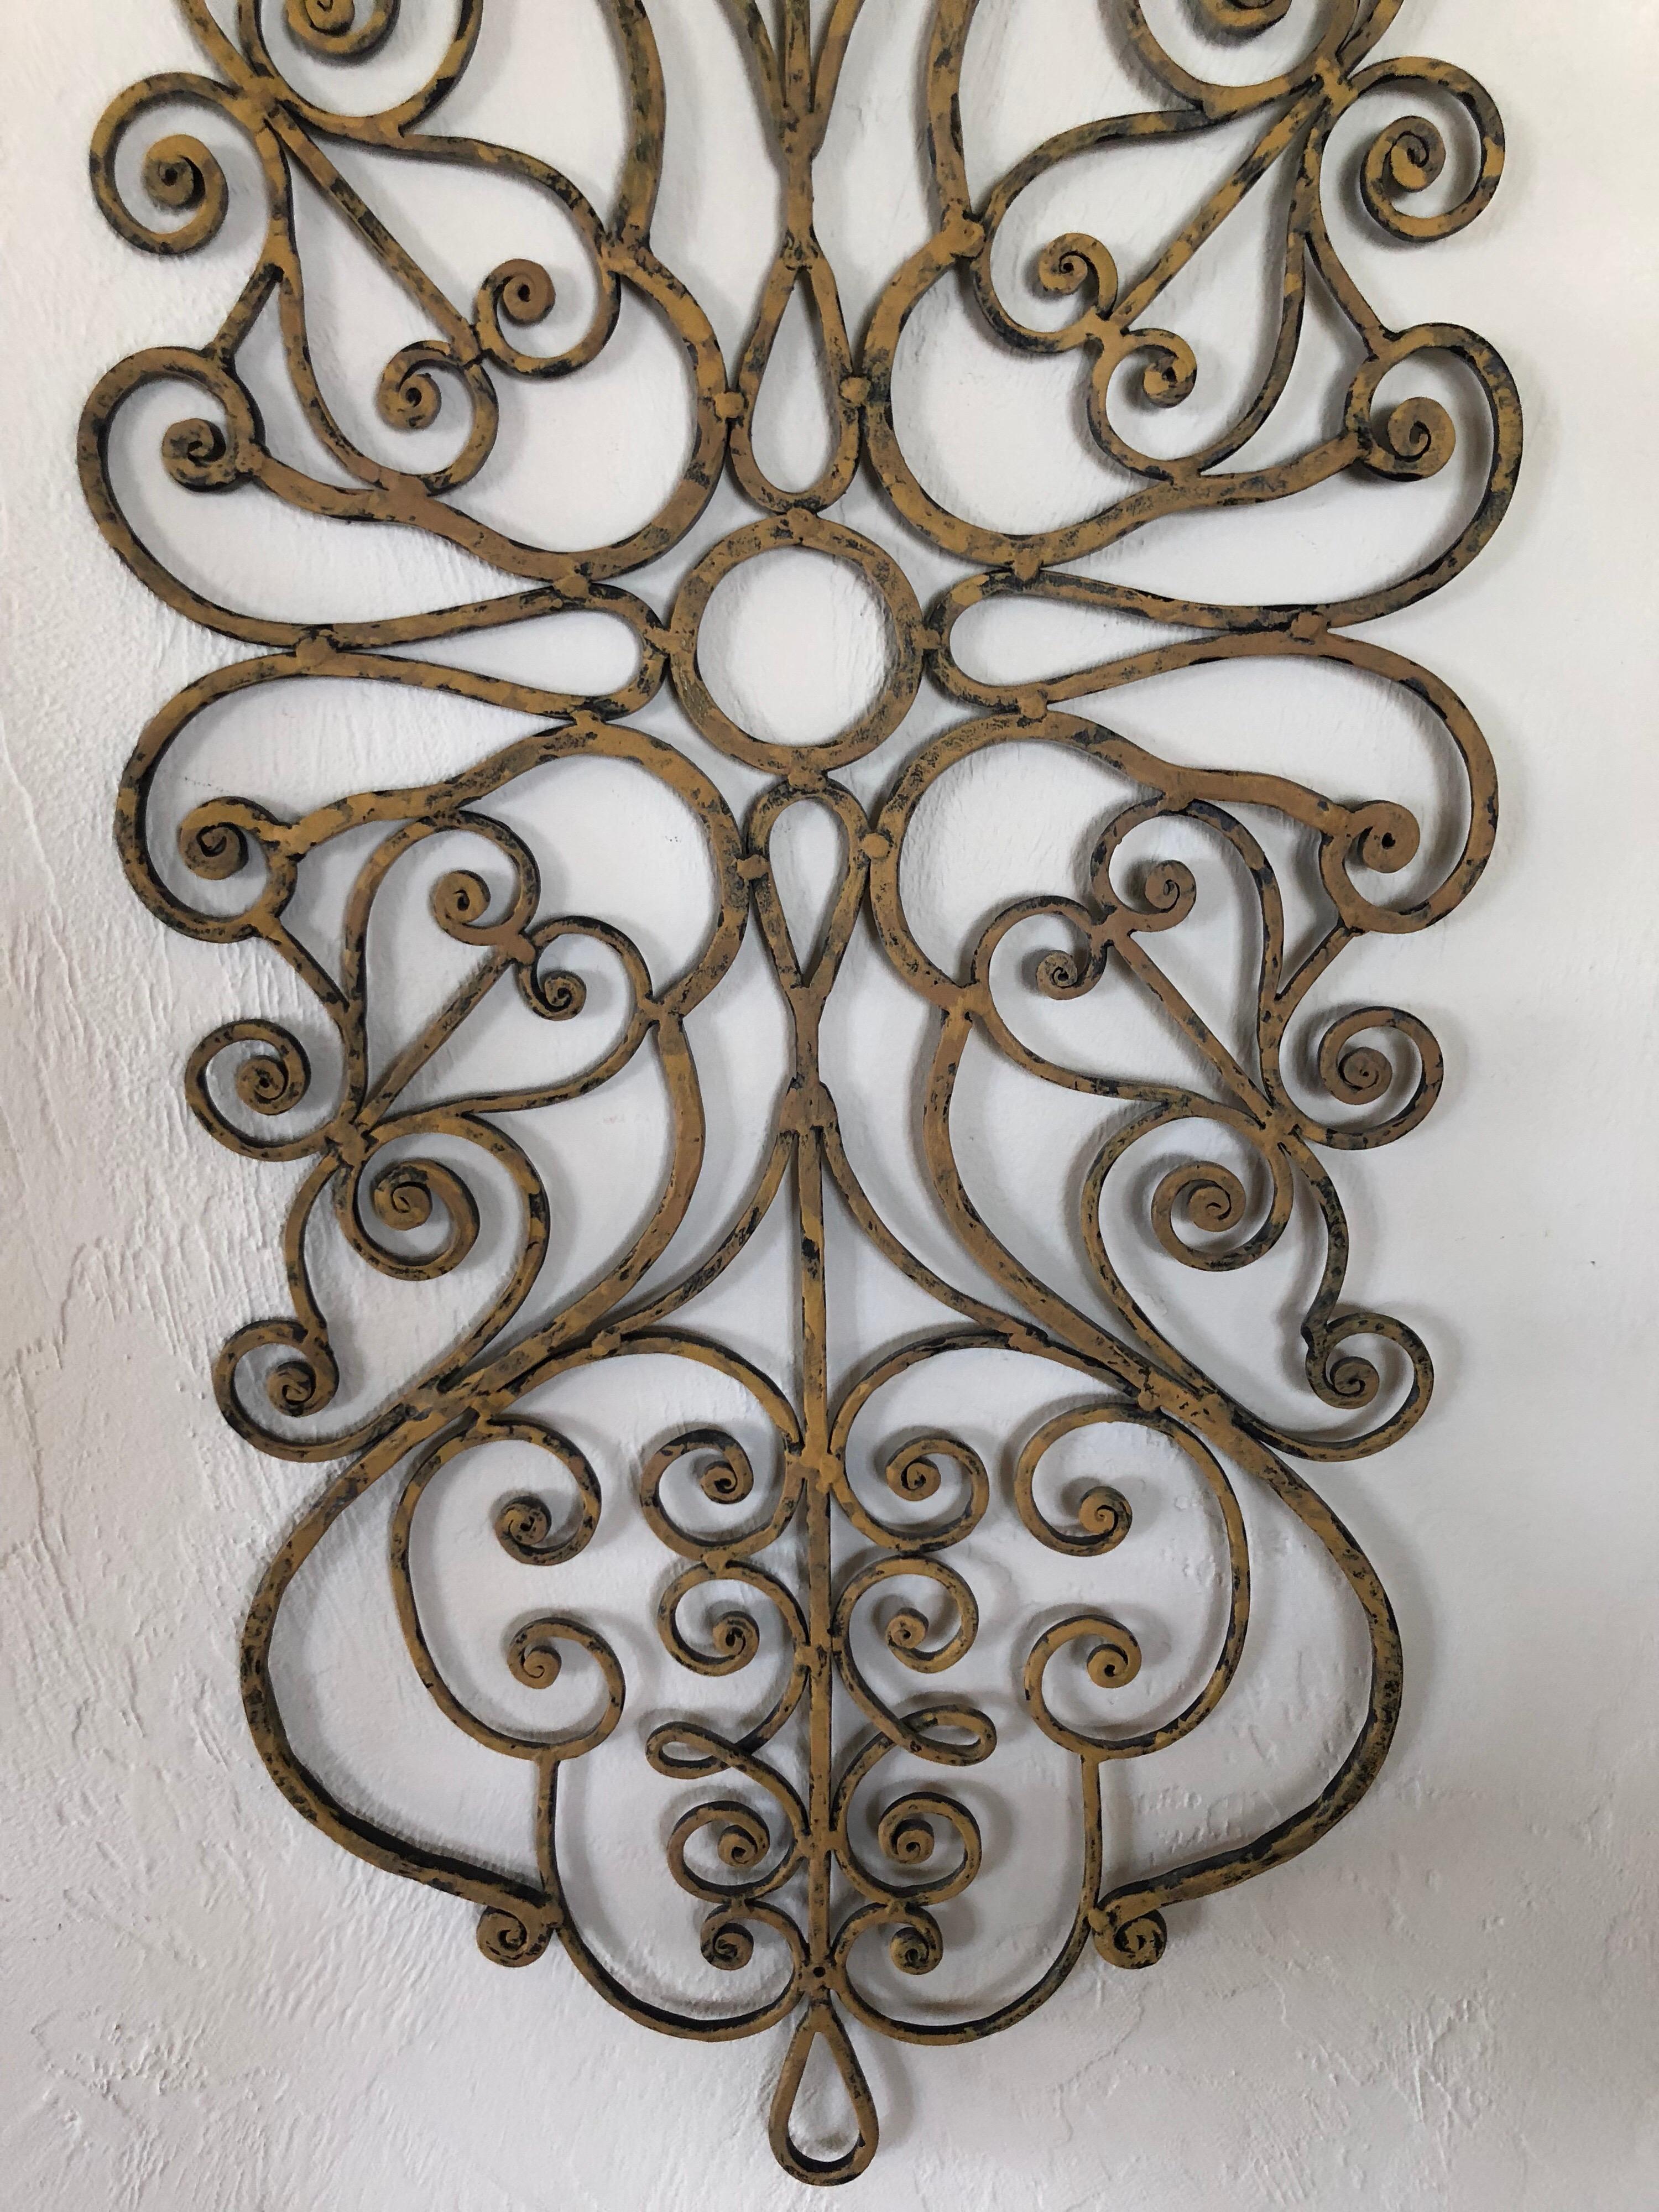 Large Hand-Wrought Iron Wall Sculpture 10